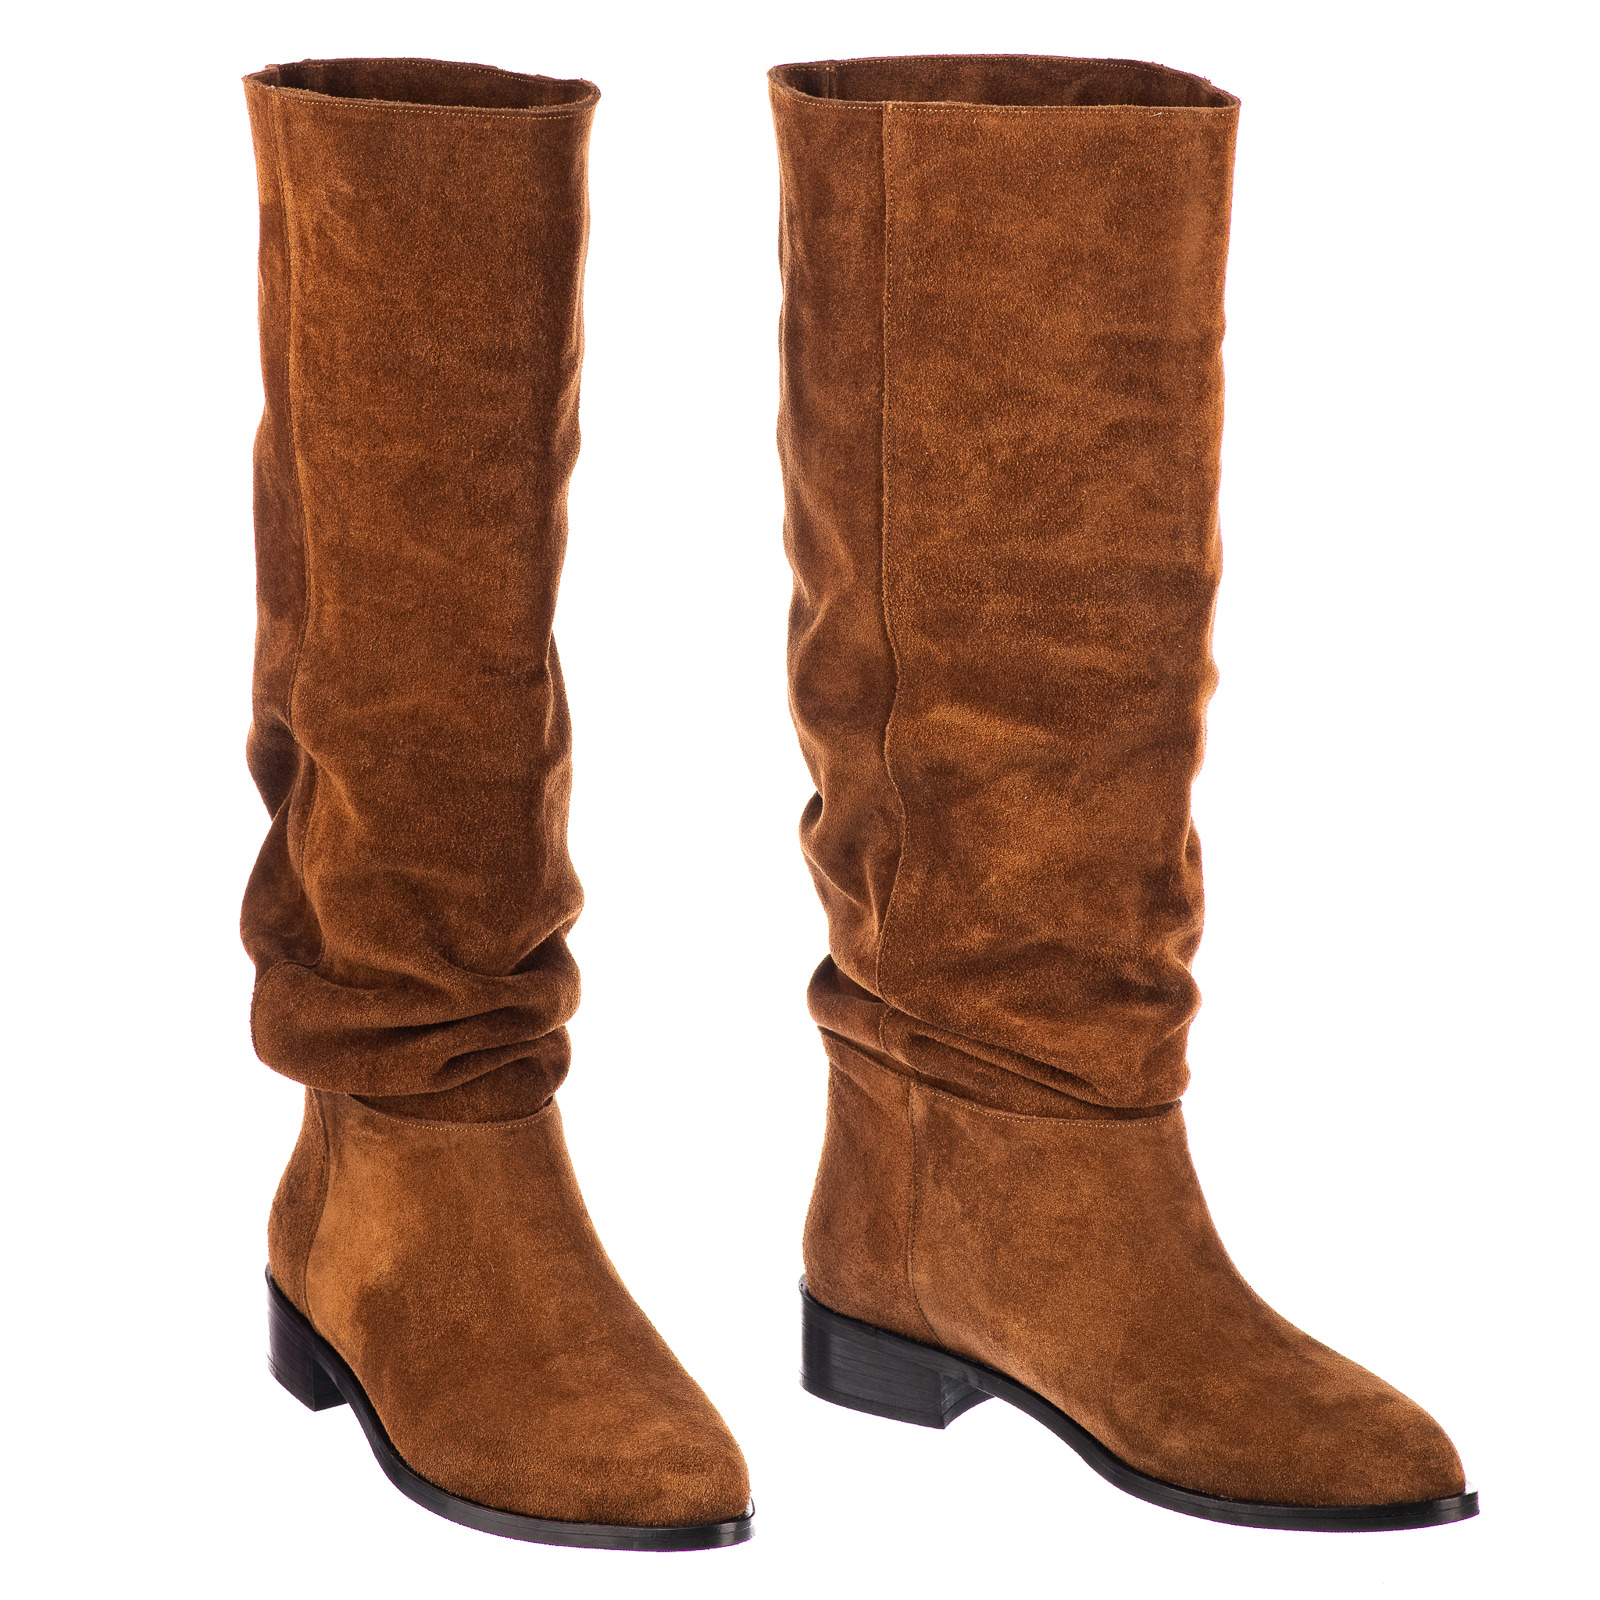 Leather boots B736 - CAMEL